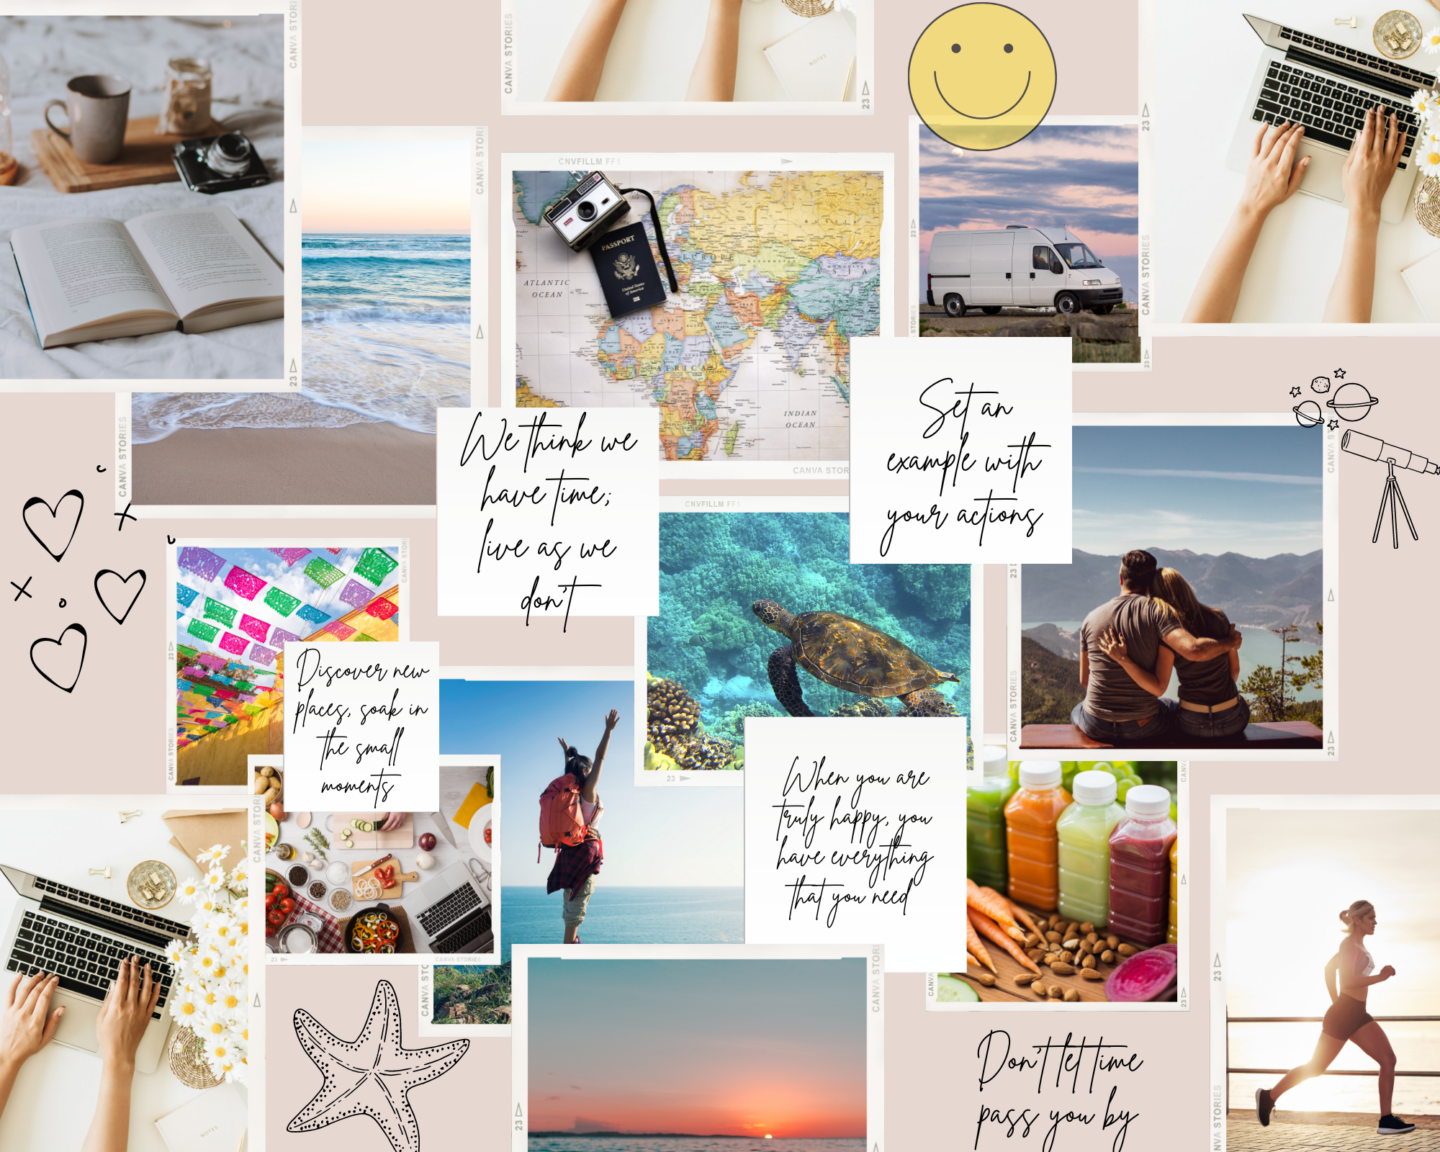 How to find inspiration with a vision board (free templates